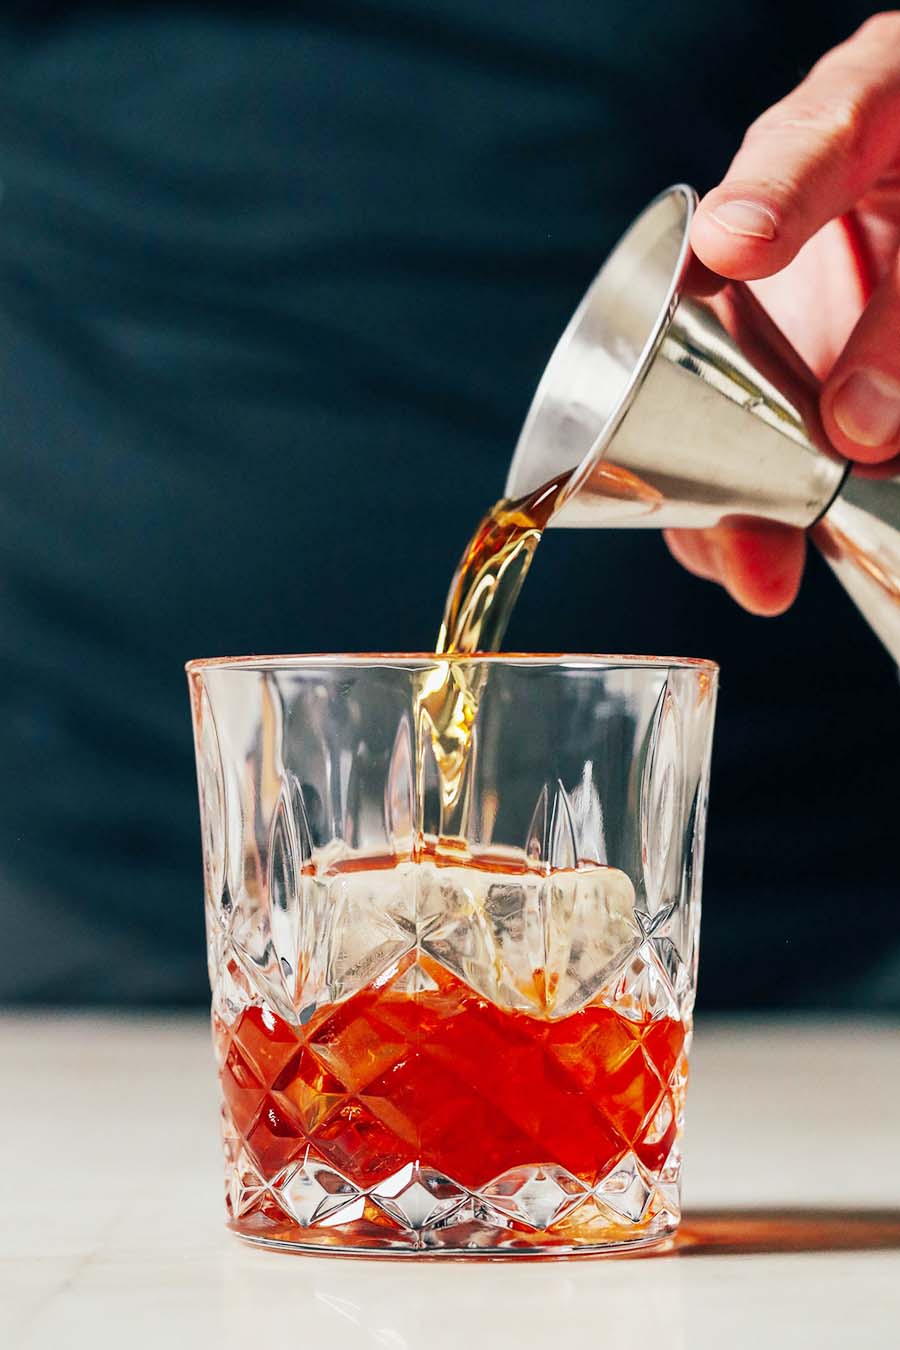 Someone pouring an Old Fashioned cocktail